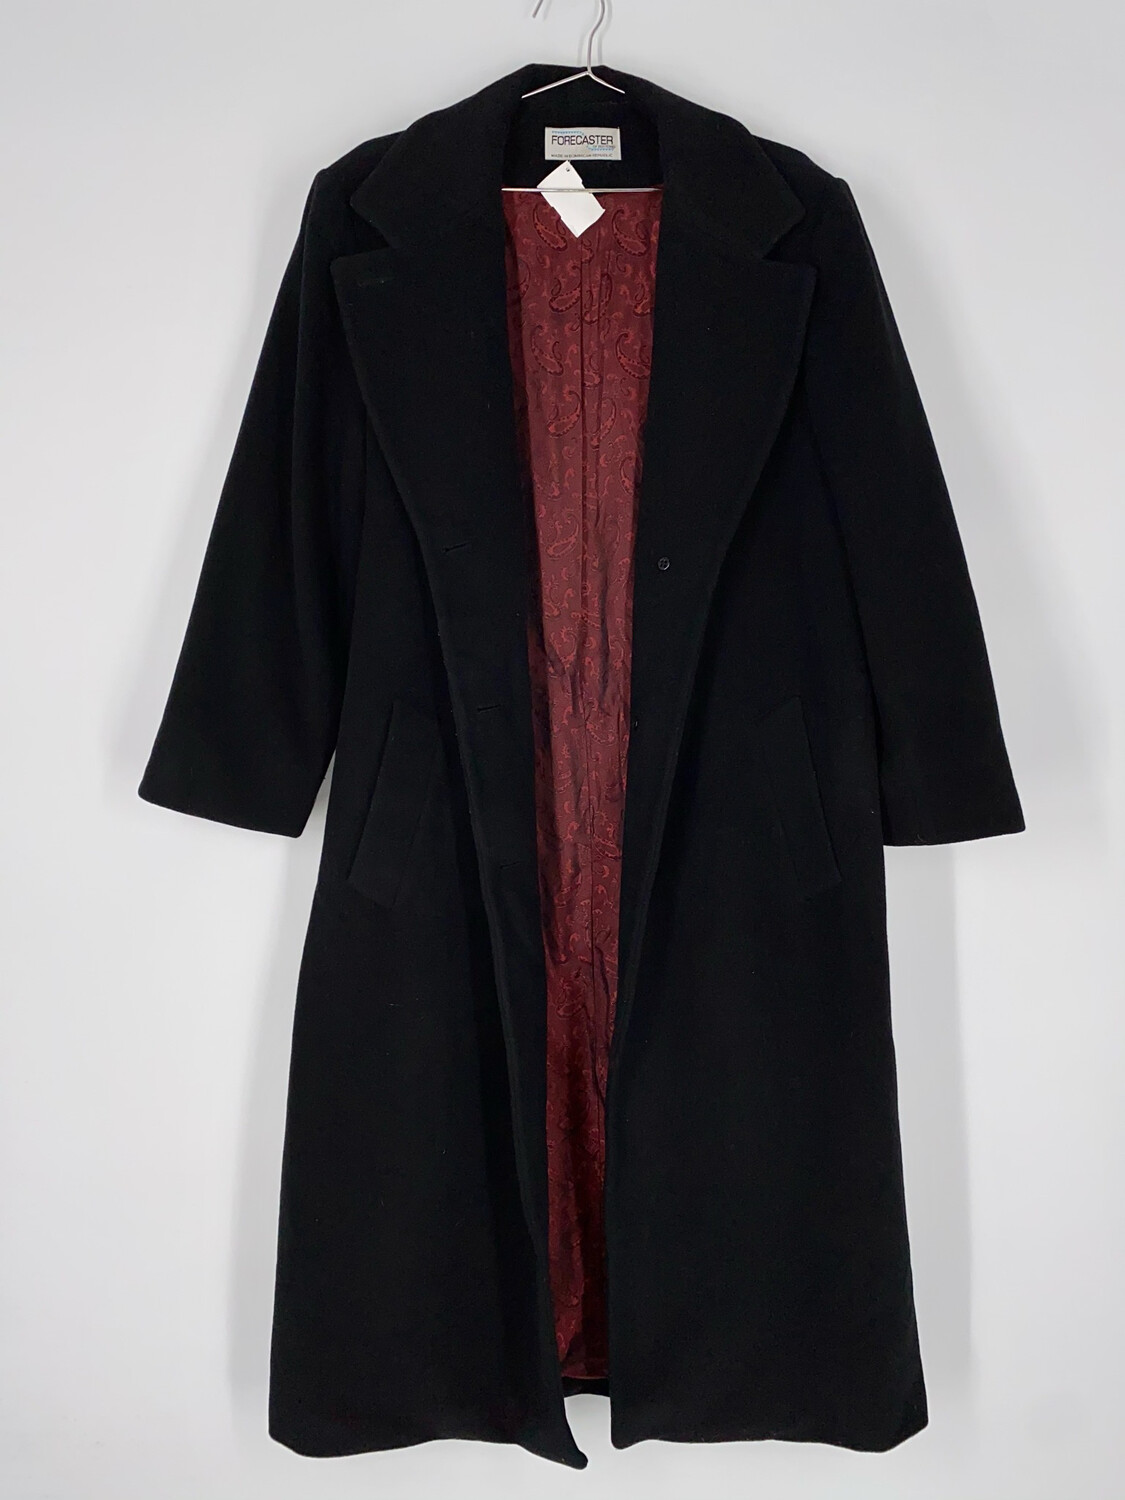 Forecaster Black Long Coat With Red Paisley Lining Size M